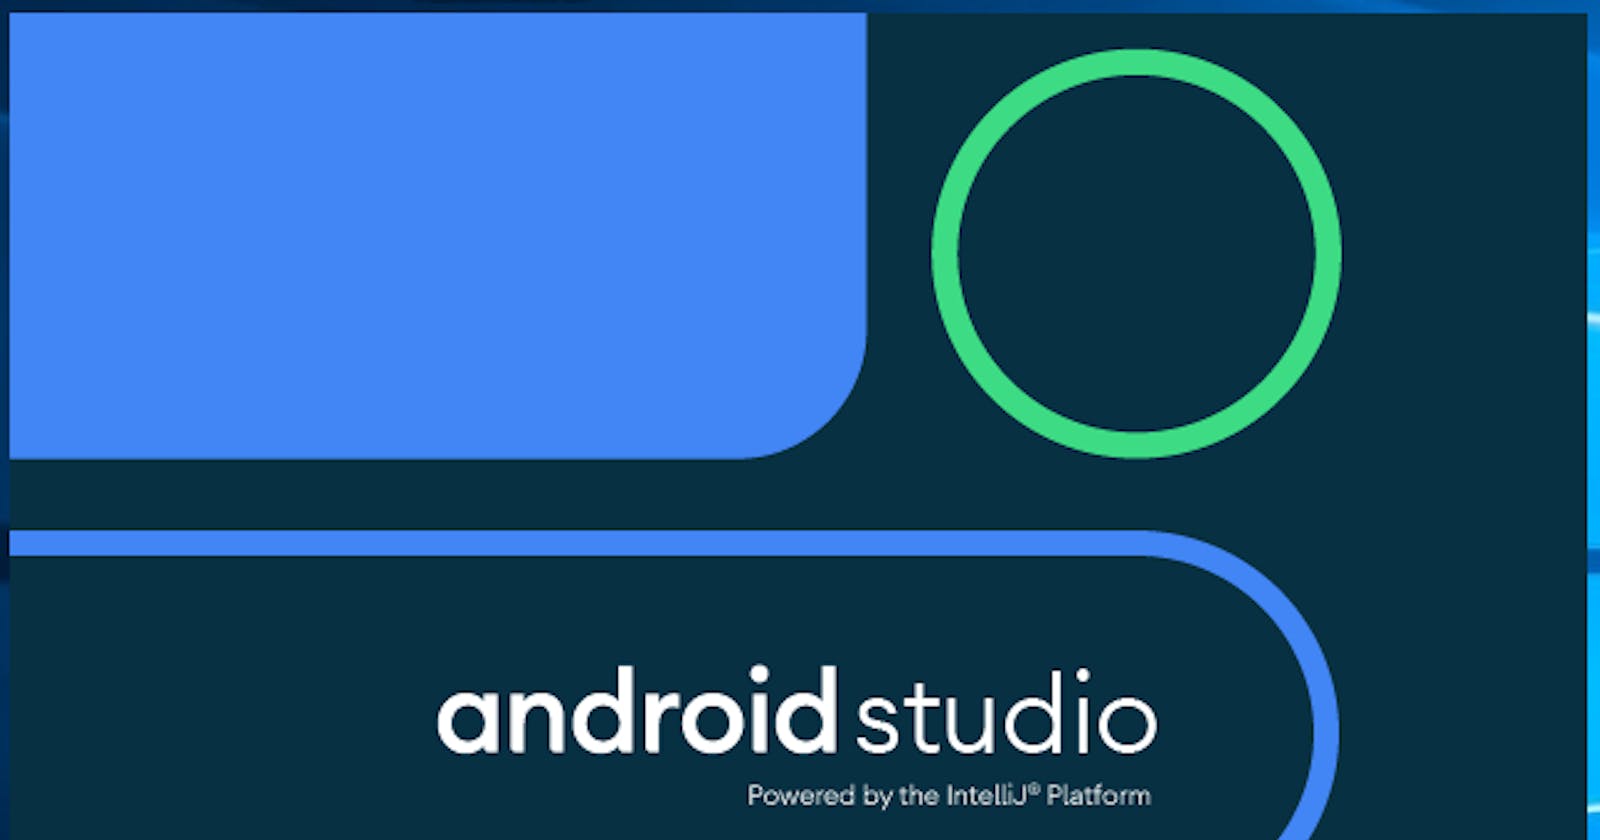 How to install Android Studio on Windows